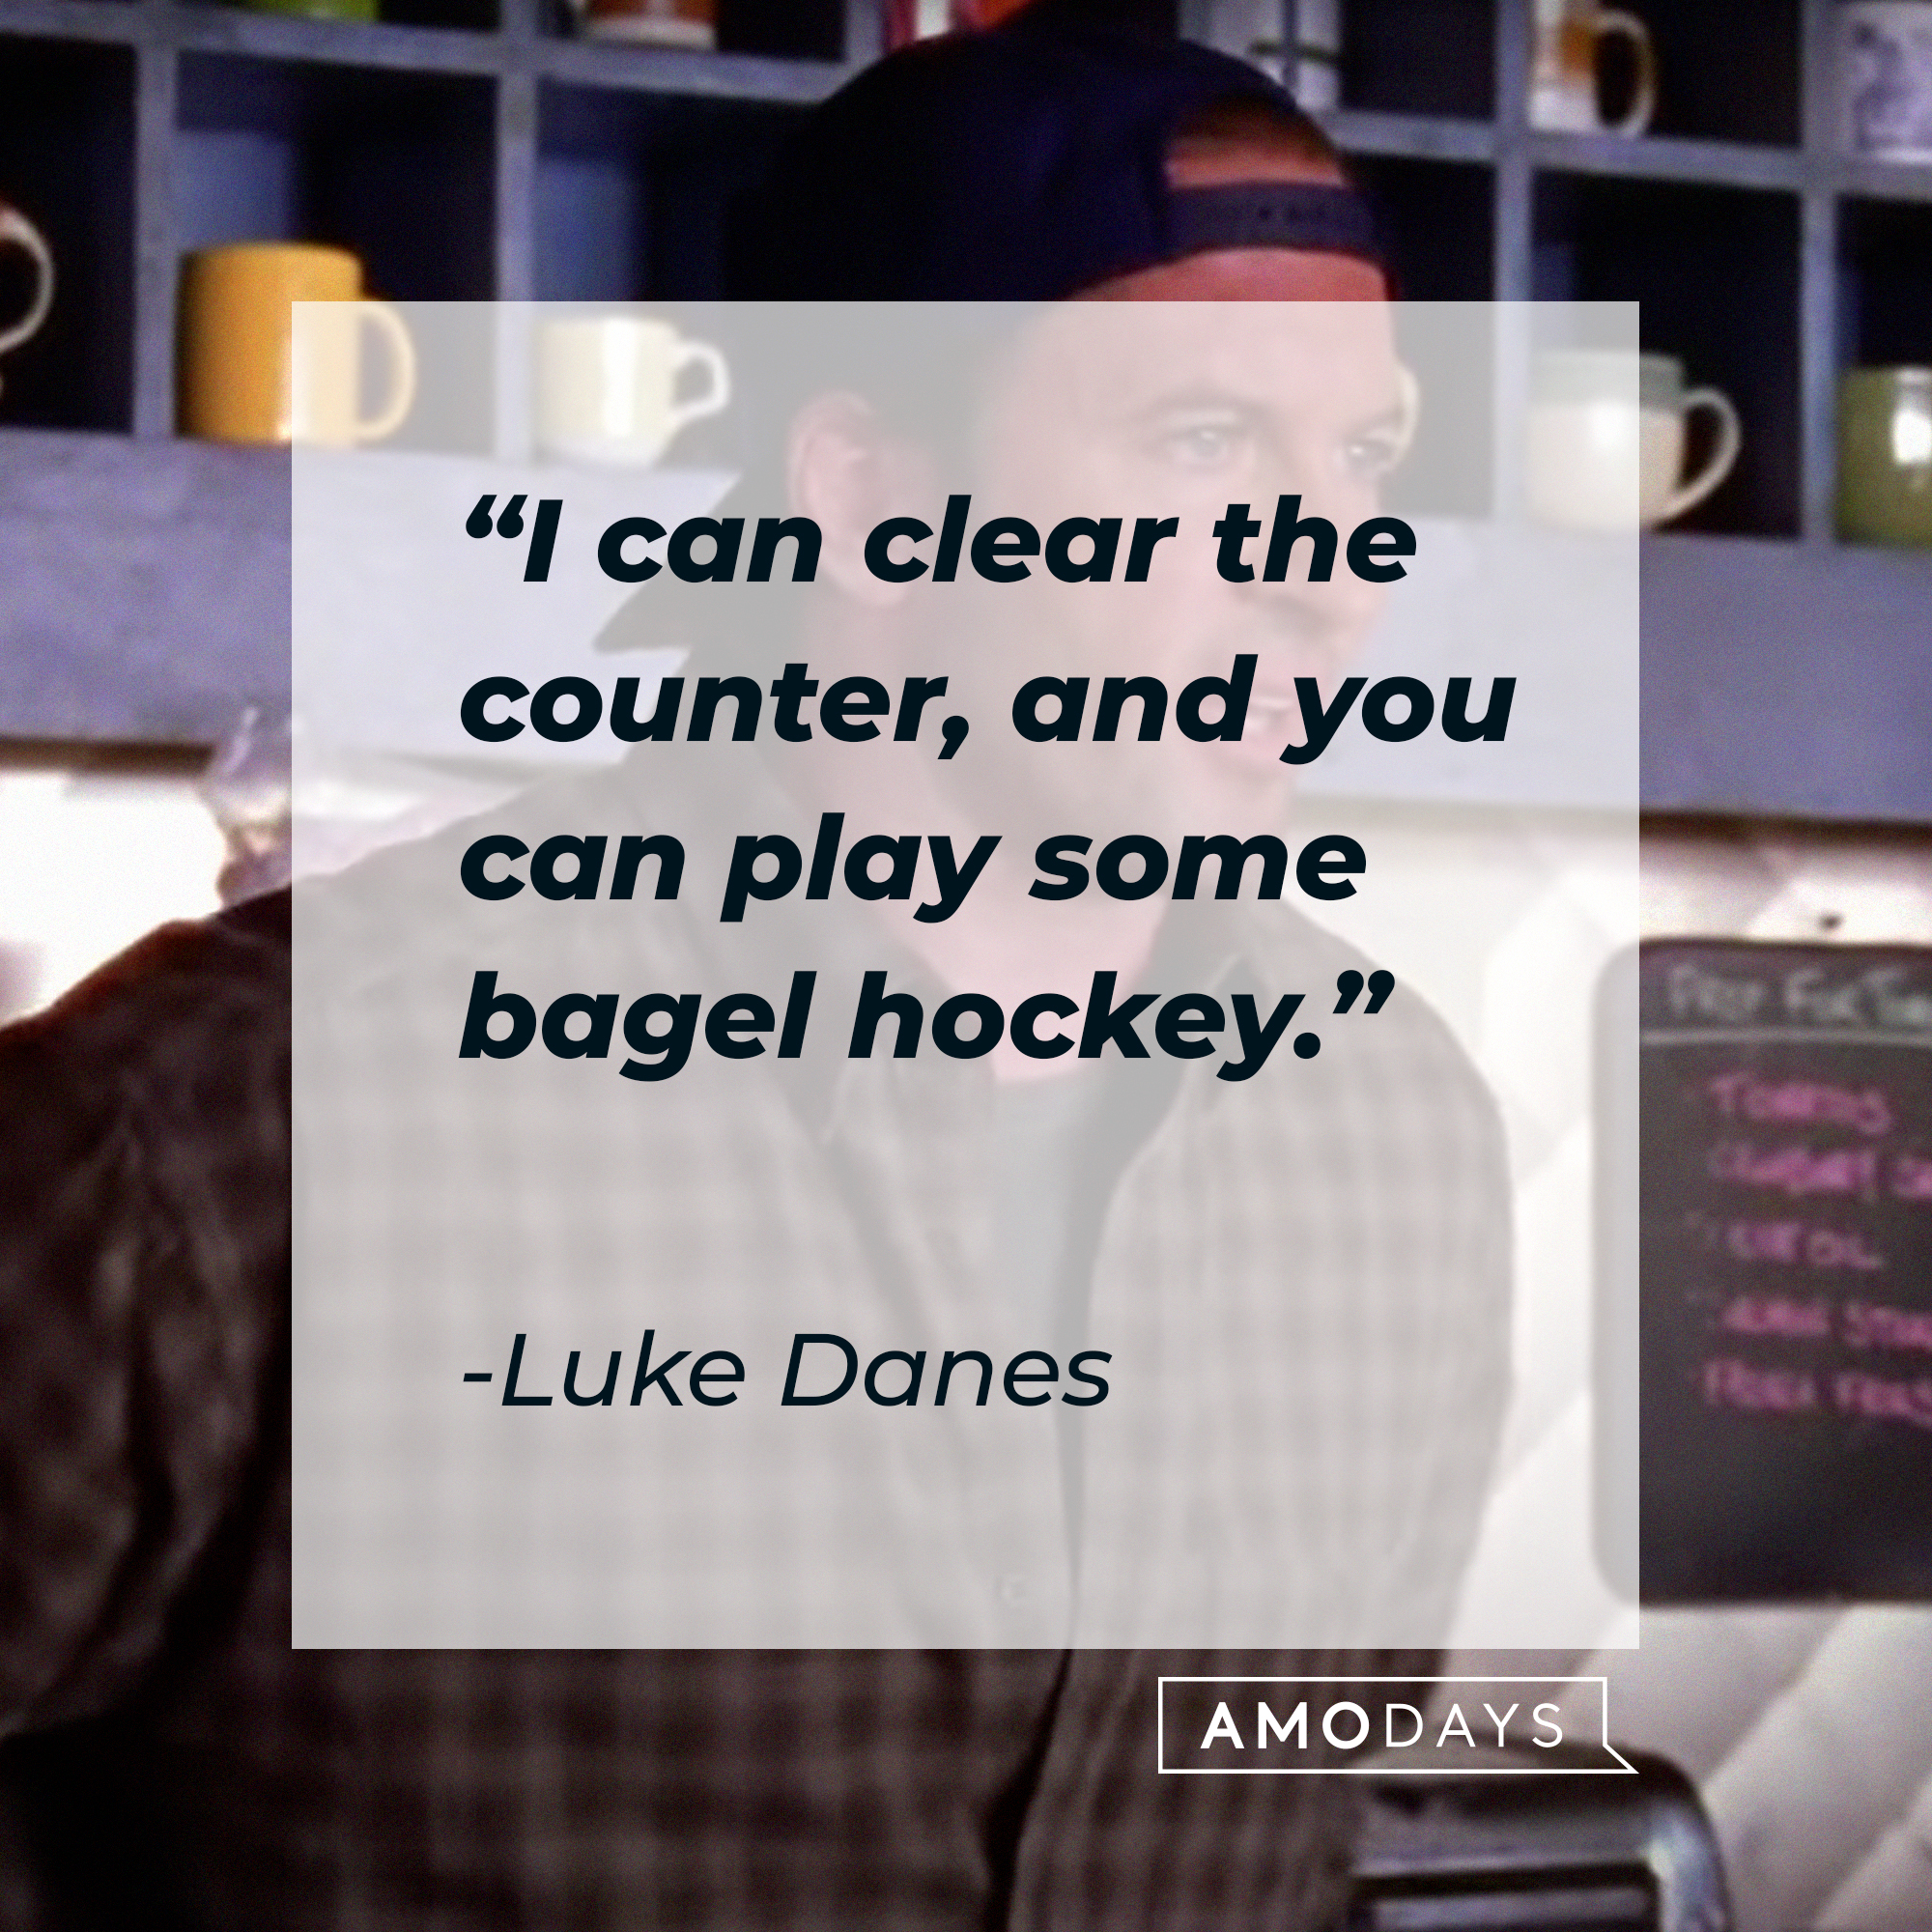 Luke Danes, with his quote: “I can clear the counter, and you can play some bagel hockey.” | Source: facebook.com/GilmoreGirls